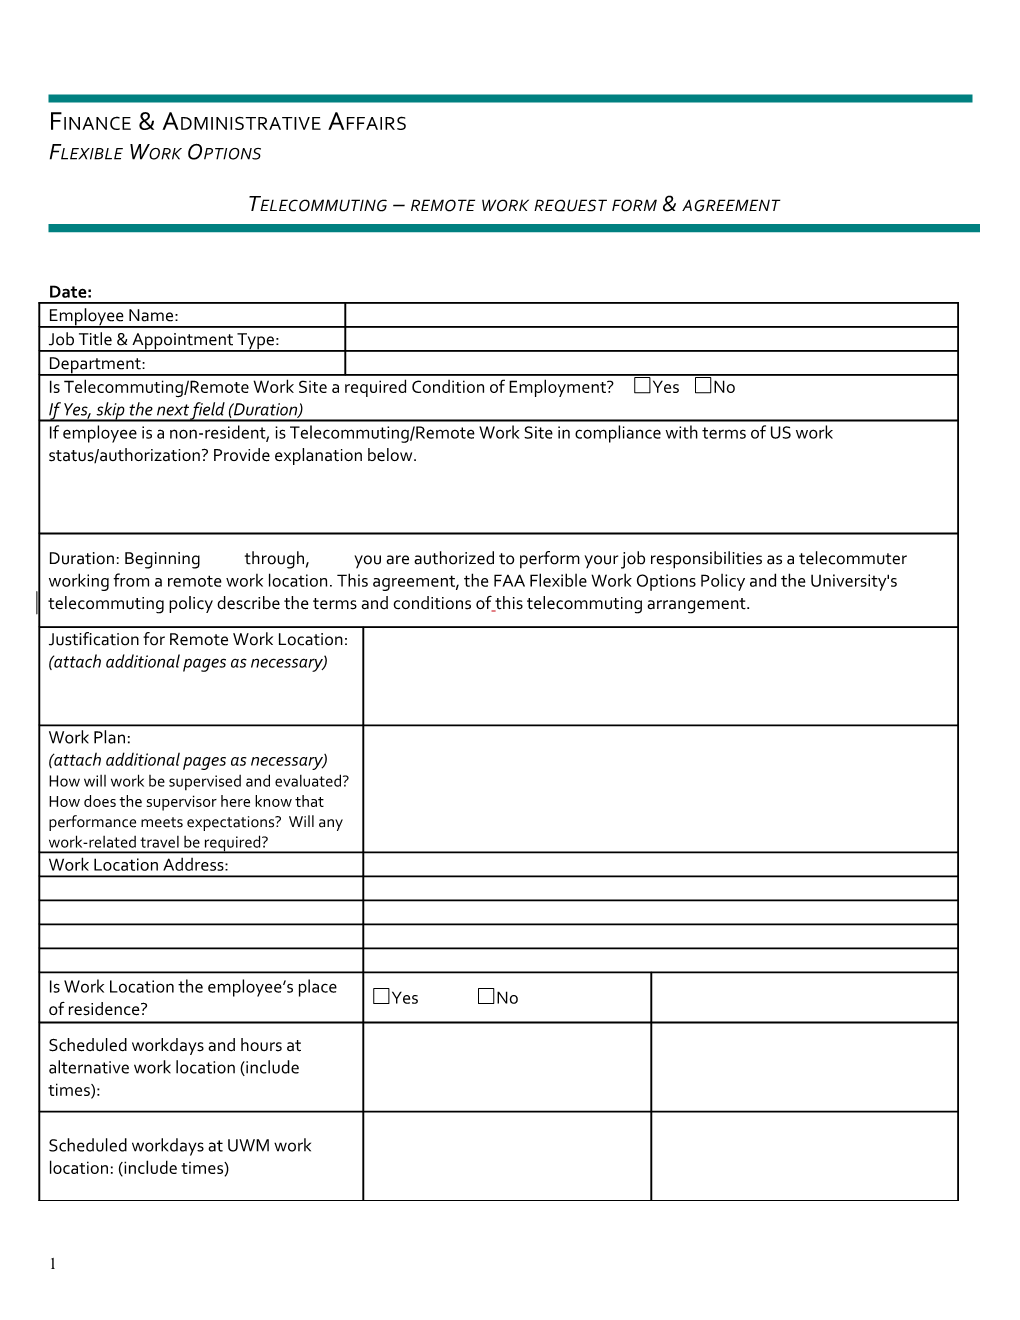 Telecommuting Remote Work Request Form & Agreement